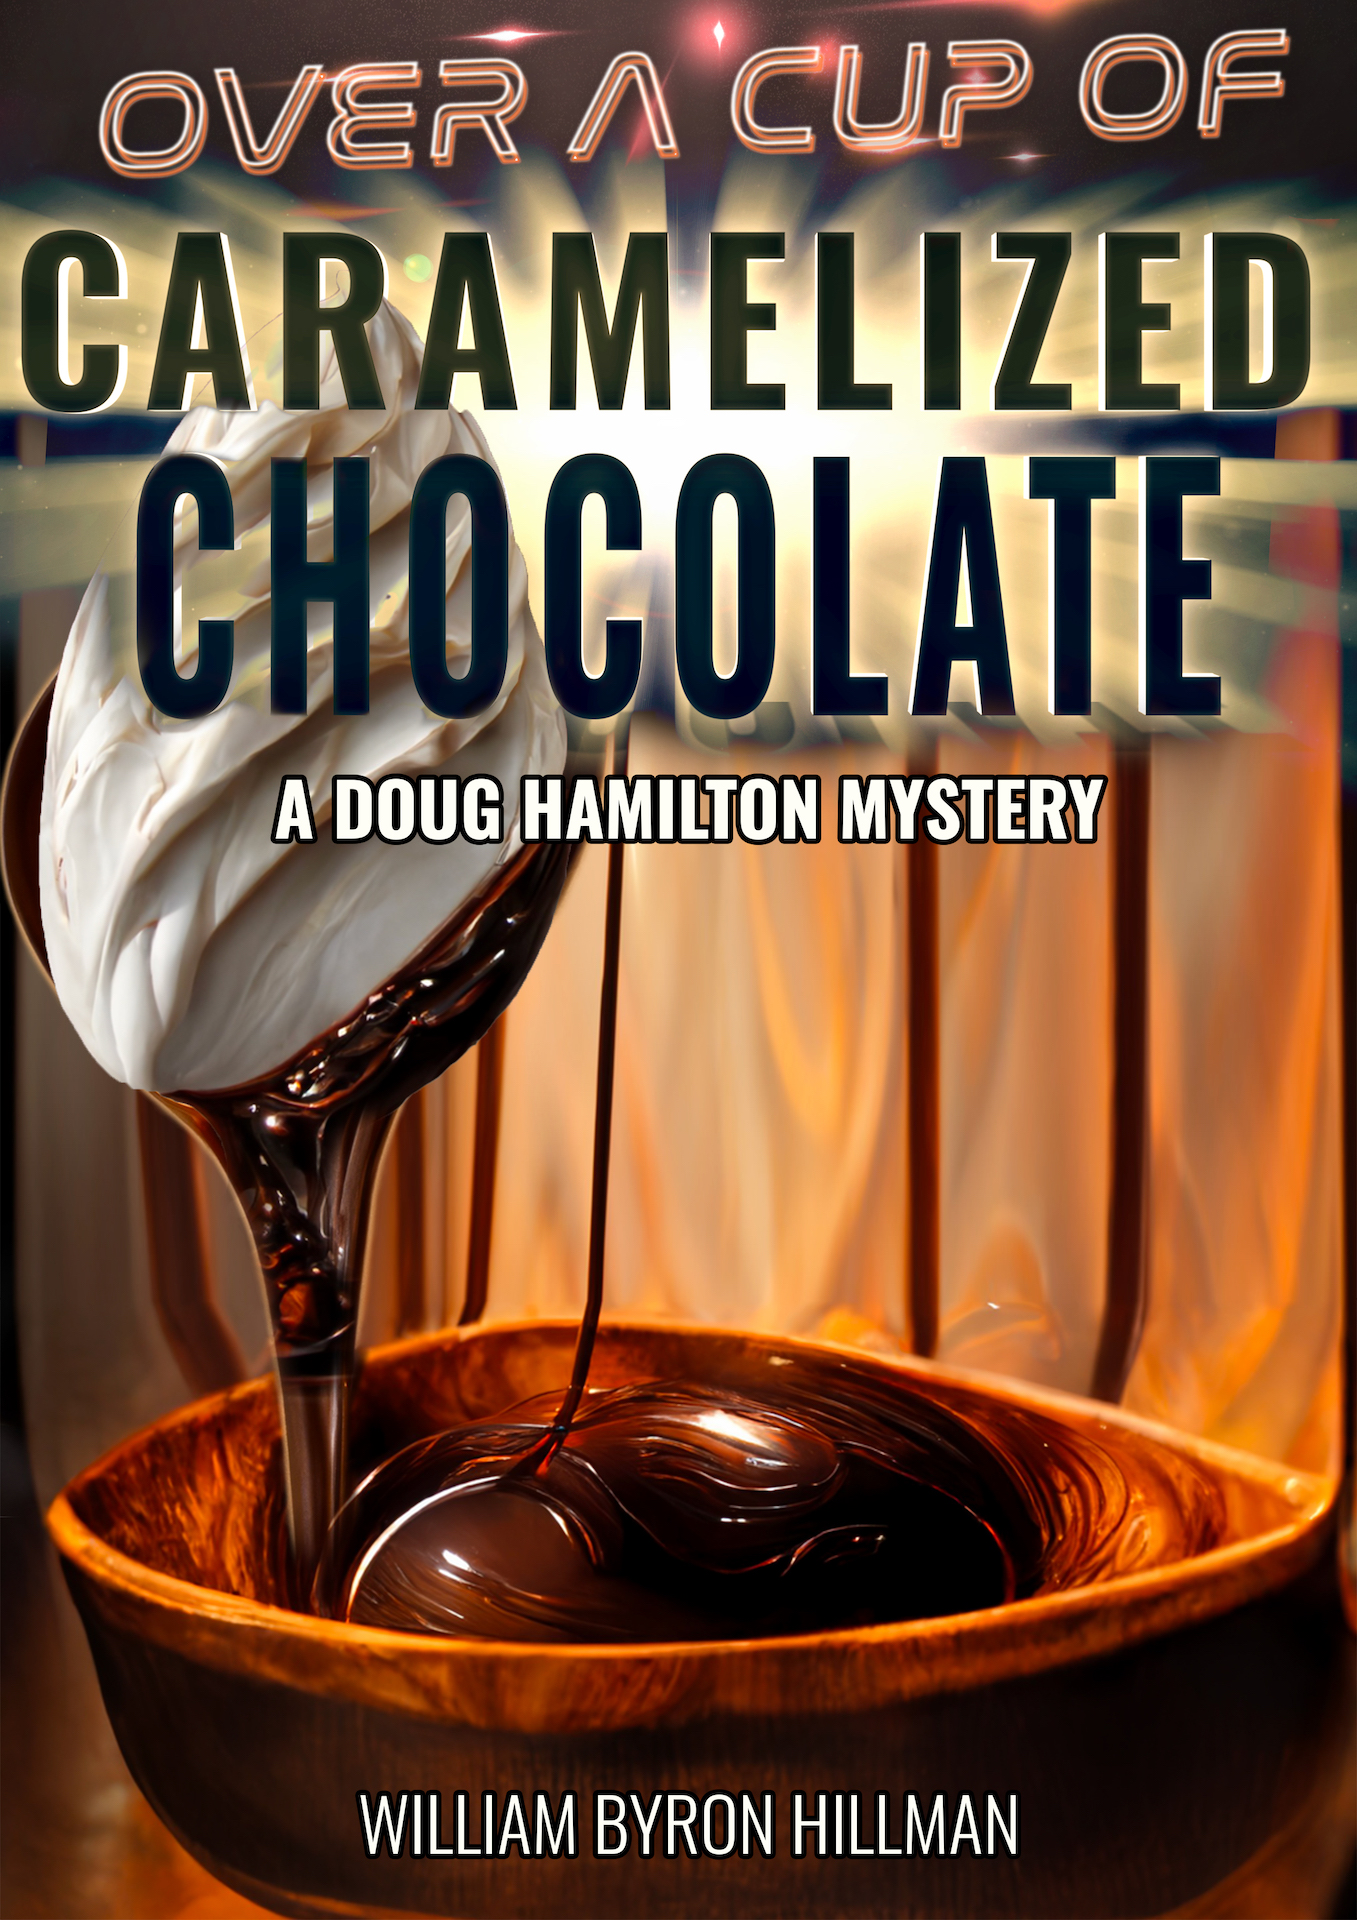 Author William Byron Hillman Releases Highly Anticipated New Novel "Over A Cup Of Caramelized Chocolate: A Doug Hamilton Mystery" Now Available Worldwide 